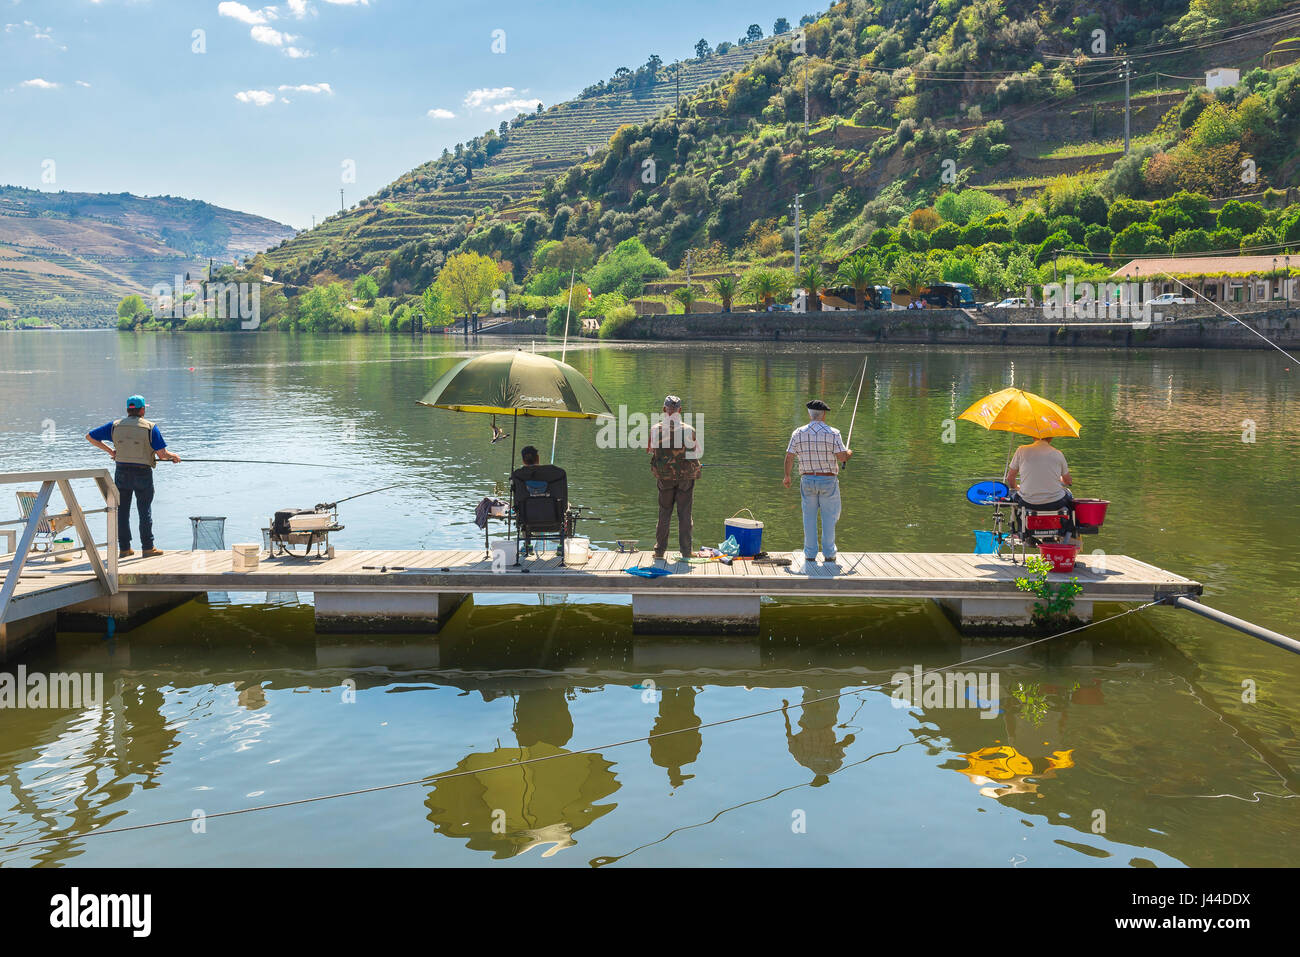 Men fishing, a group of middle aged men fishing in Portugal, Europe. Stock Photo